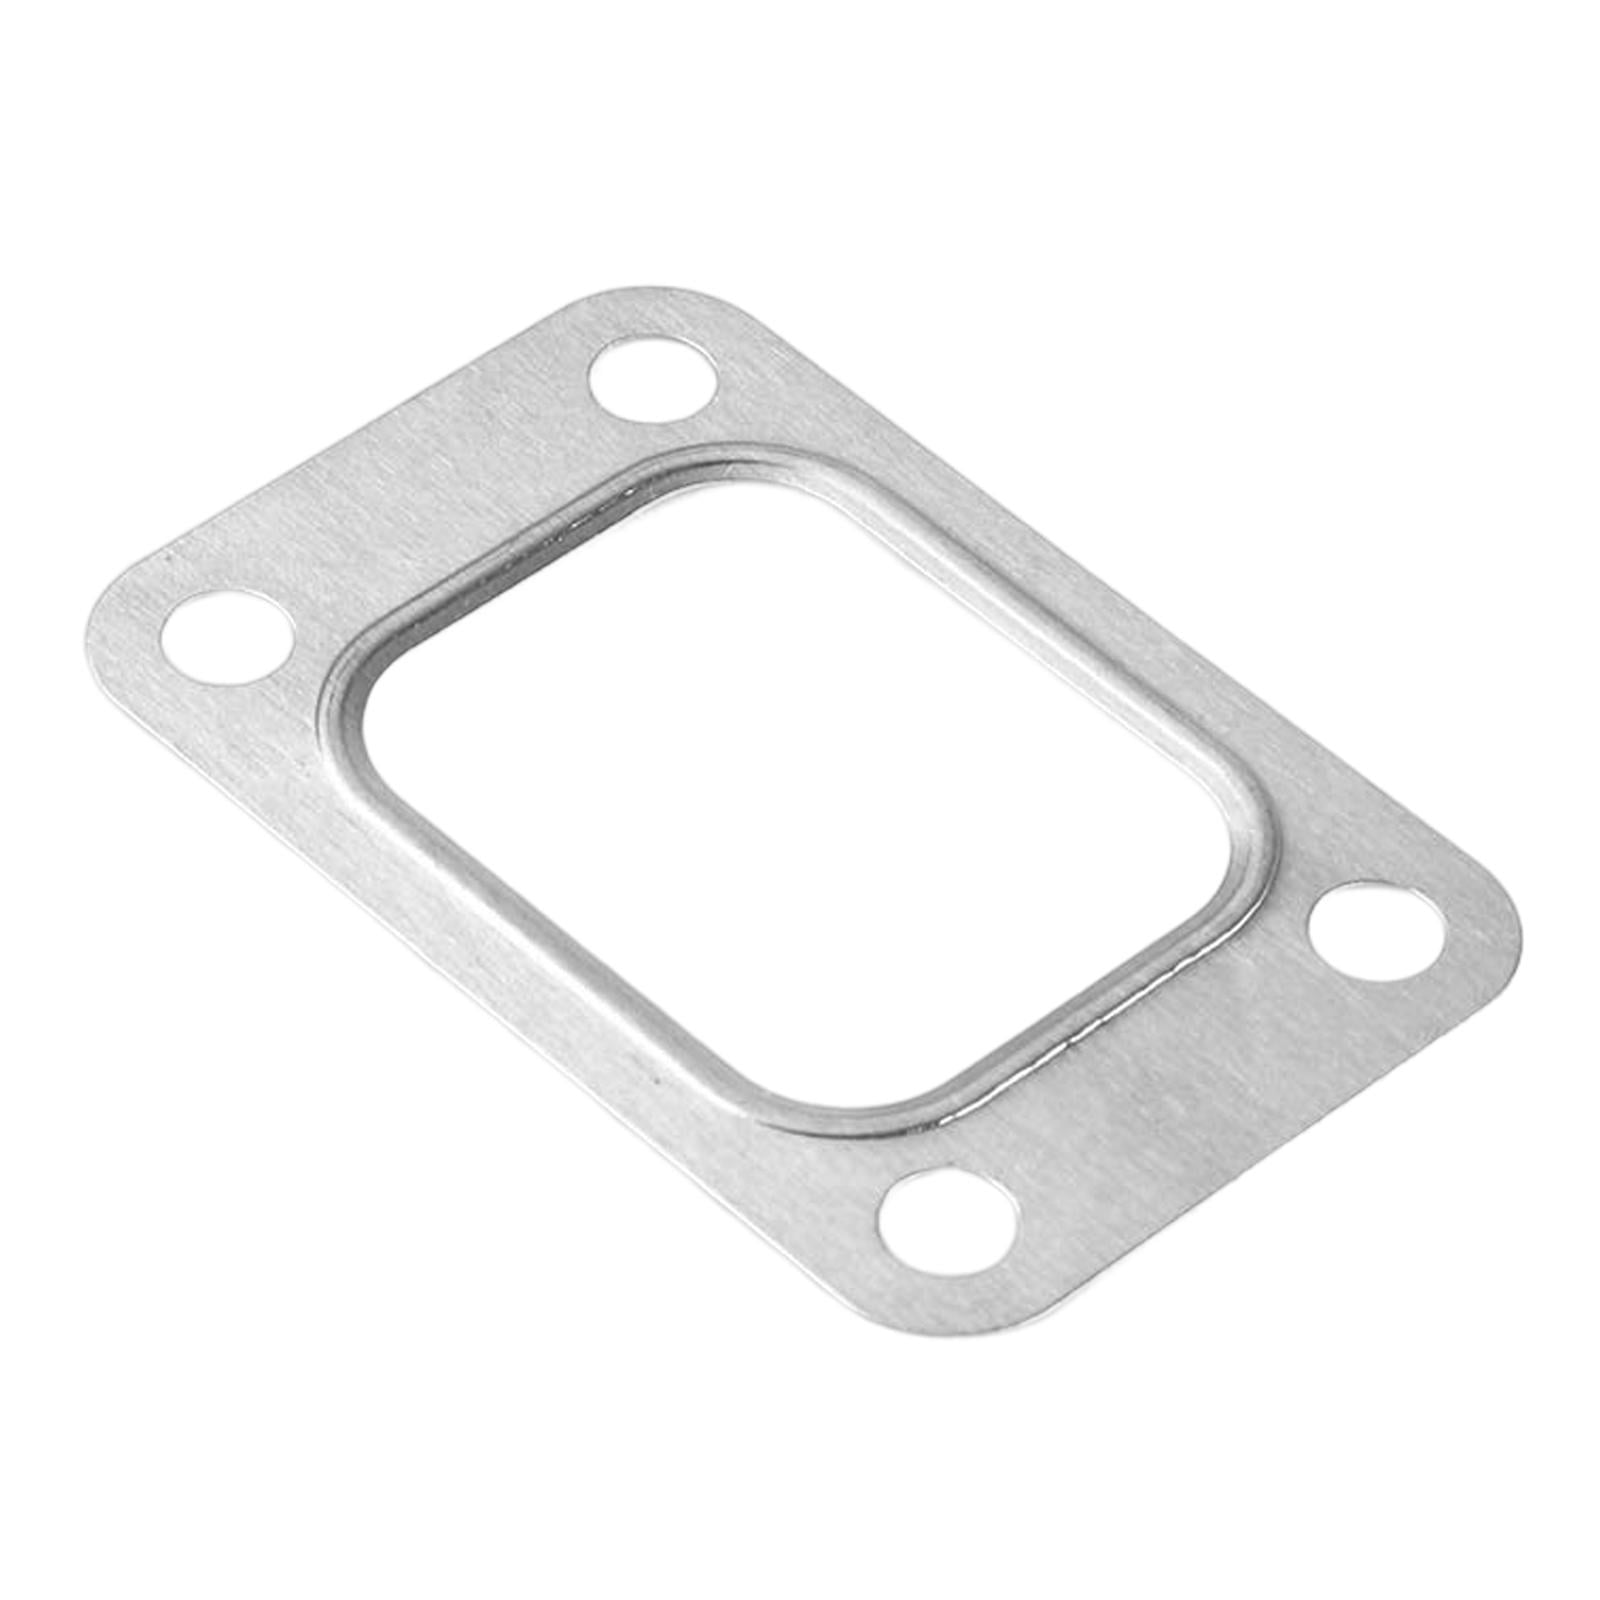 Stainless Steel Exhaust Flange Turbo Exhaust Gasket 10pcs Stainless Steel Turbo Exhaust Inlet Manifold Flange Gasket Fits for T2 T25/T28 